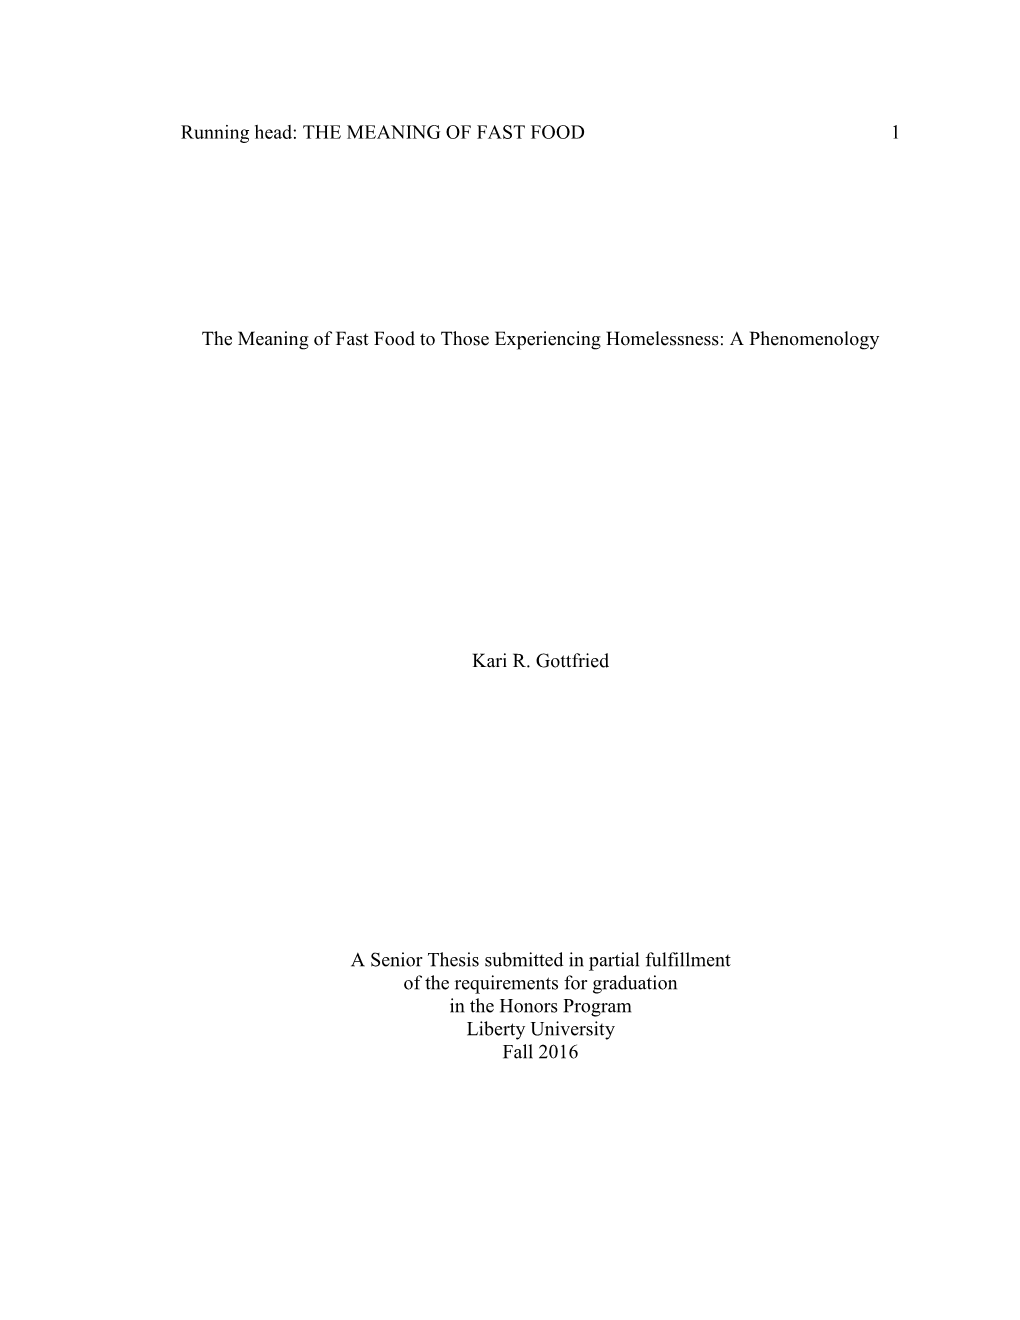 The Meaning of Fast Food to Those Experiencing Homelessness: a Phenomenology